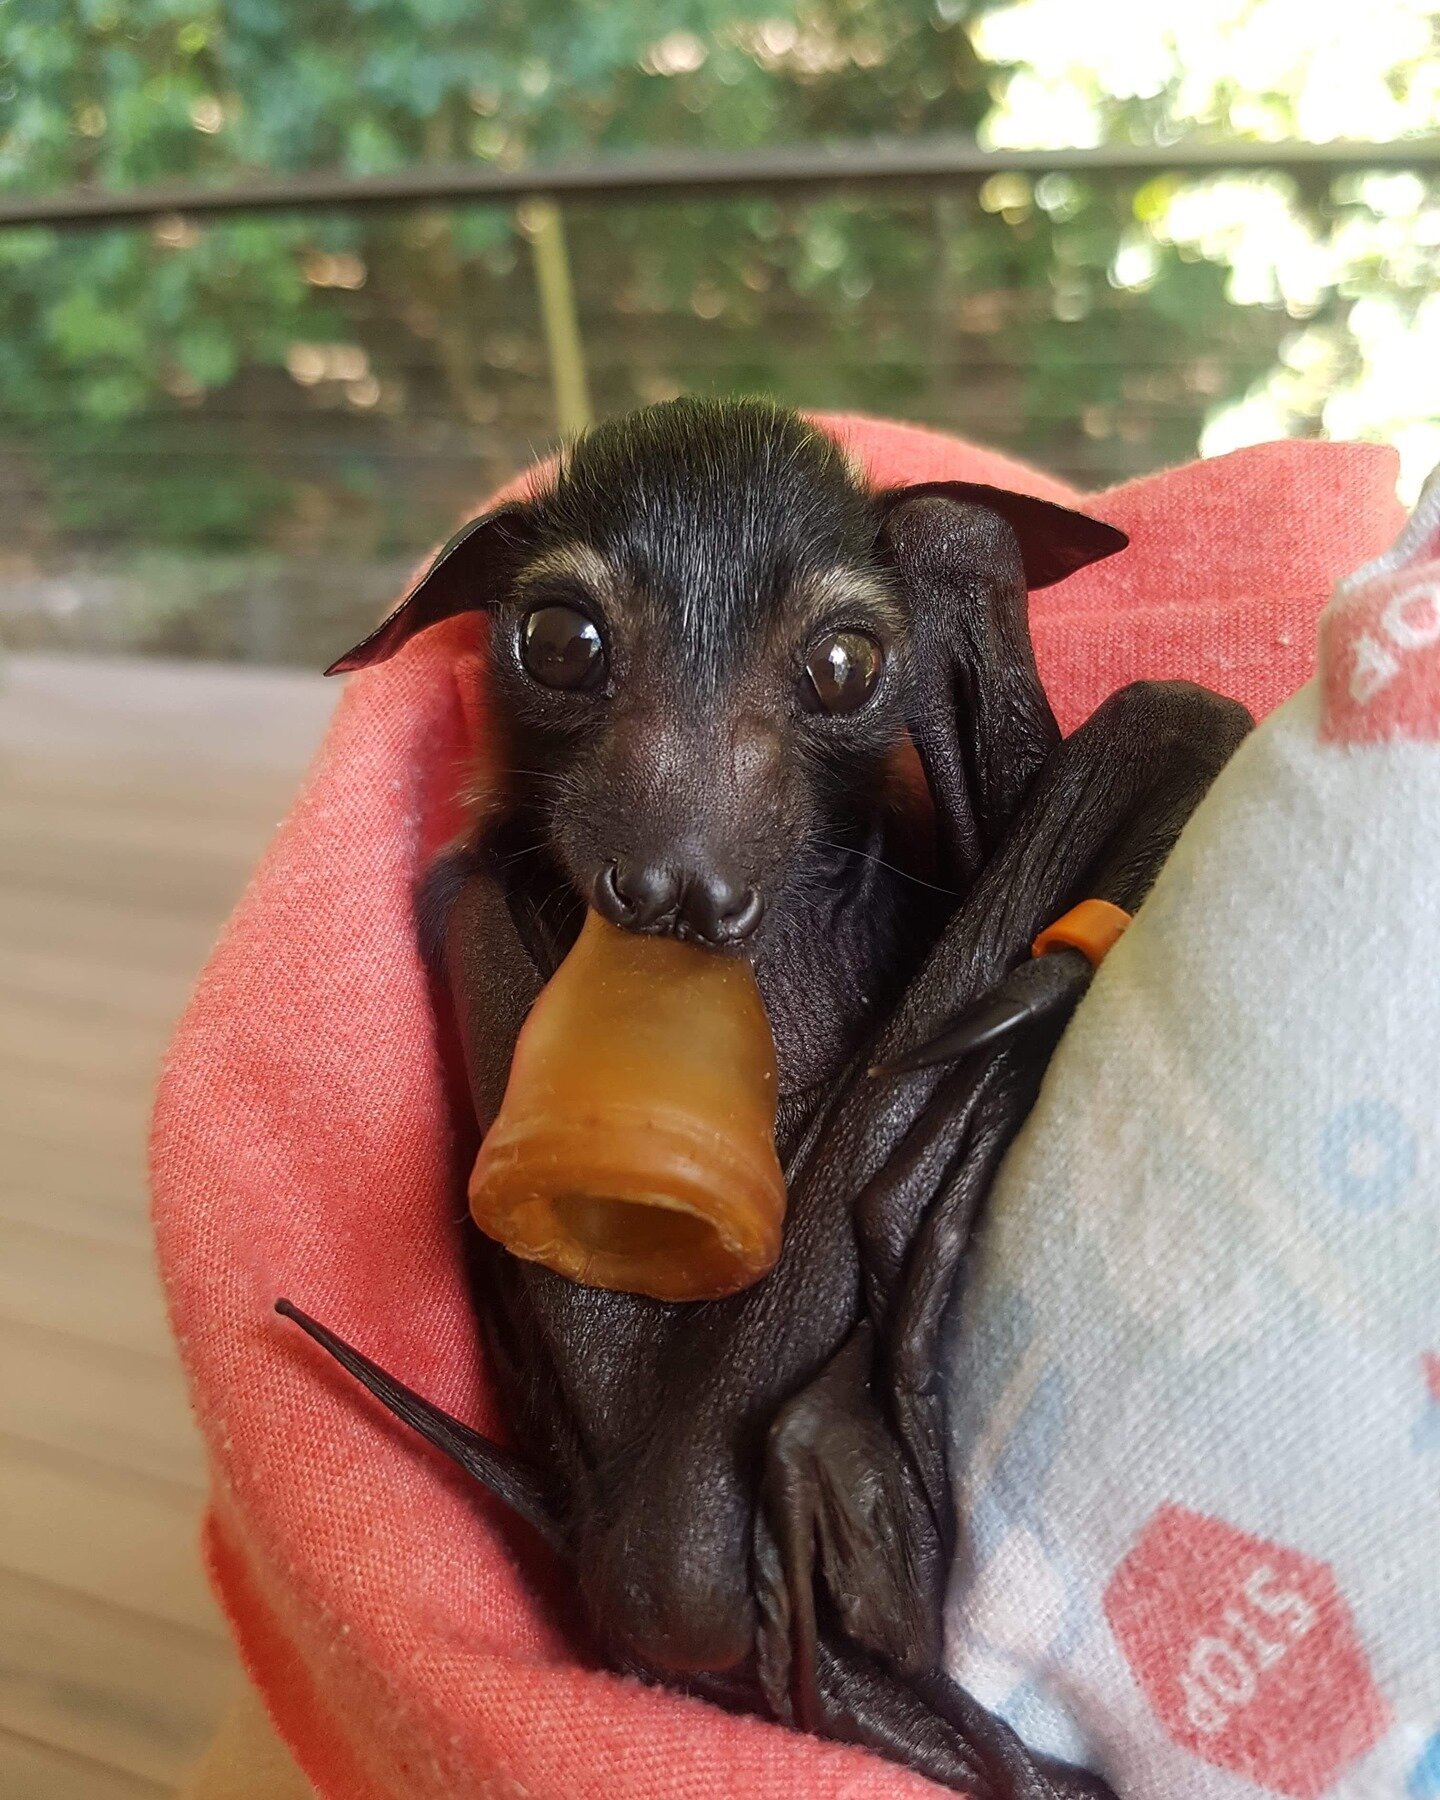 This is an orphaned flying fox. Right now you can't volunteer internationally in Australia BUT in 2022 you will be able to, are you going to say no to that face?⁣
⁣
It may seem far away now but travel is coming back and it's time to start dreaming up